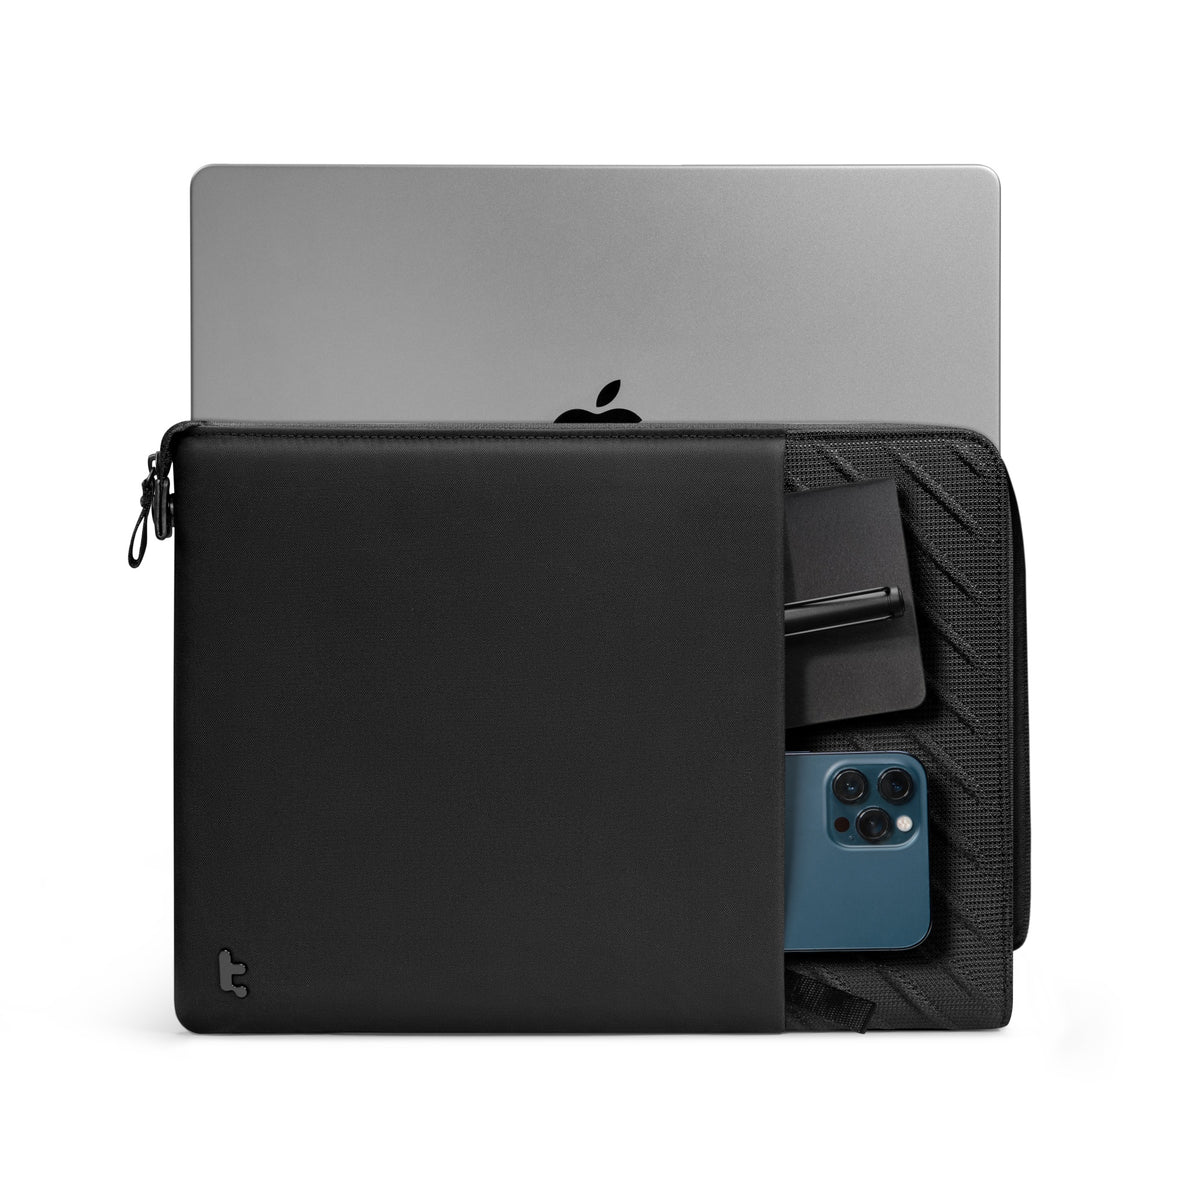 Voyage-A10 Laptop Sleeve for MacBook